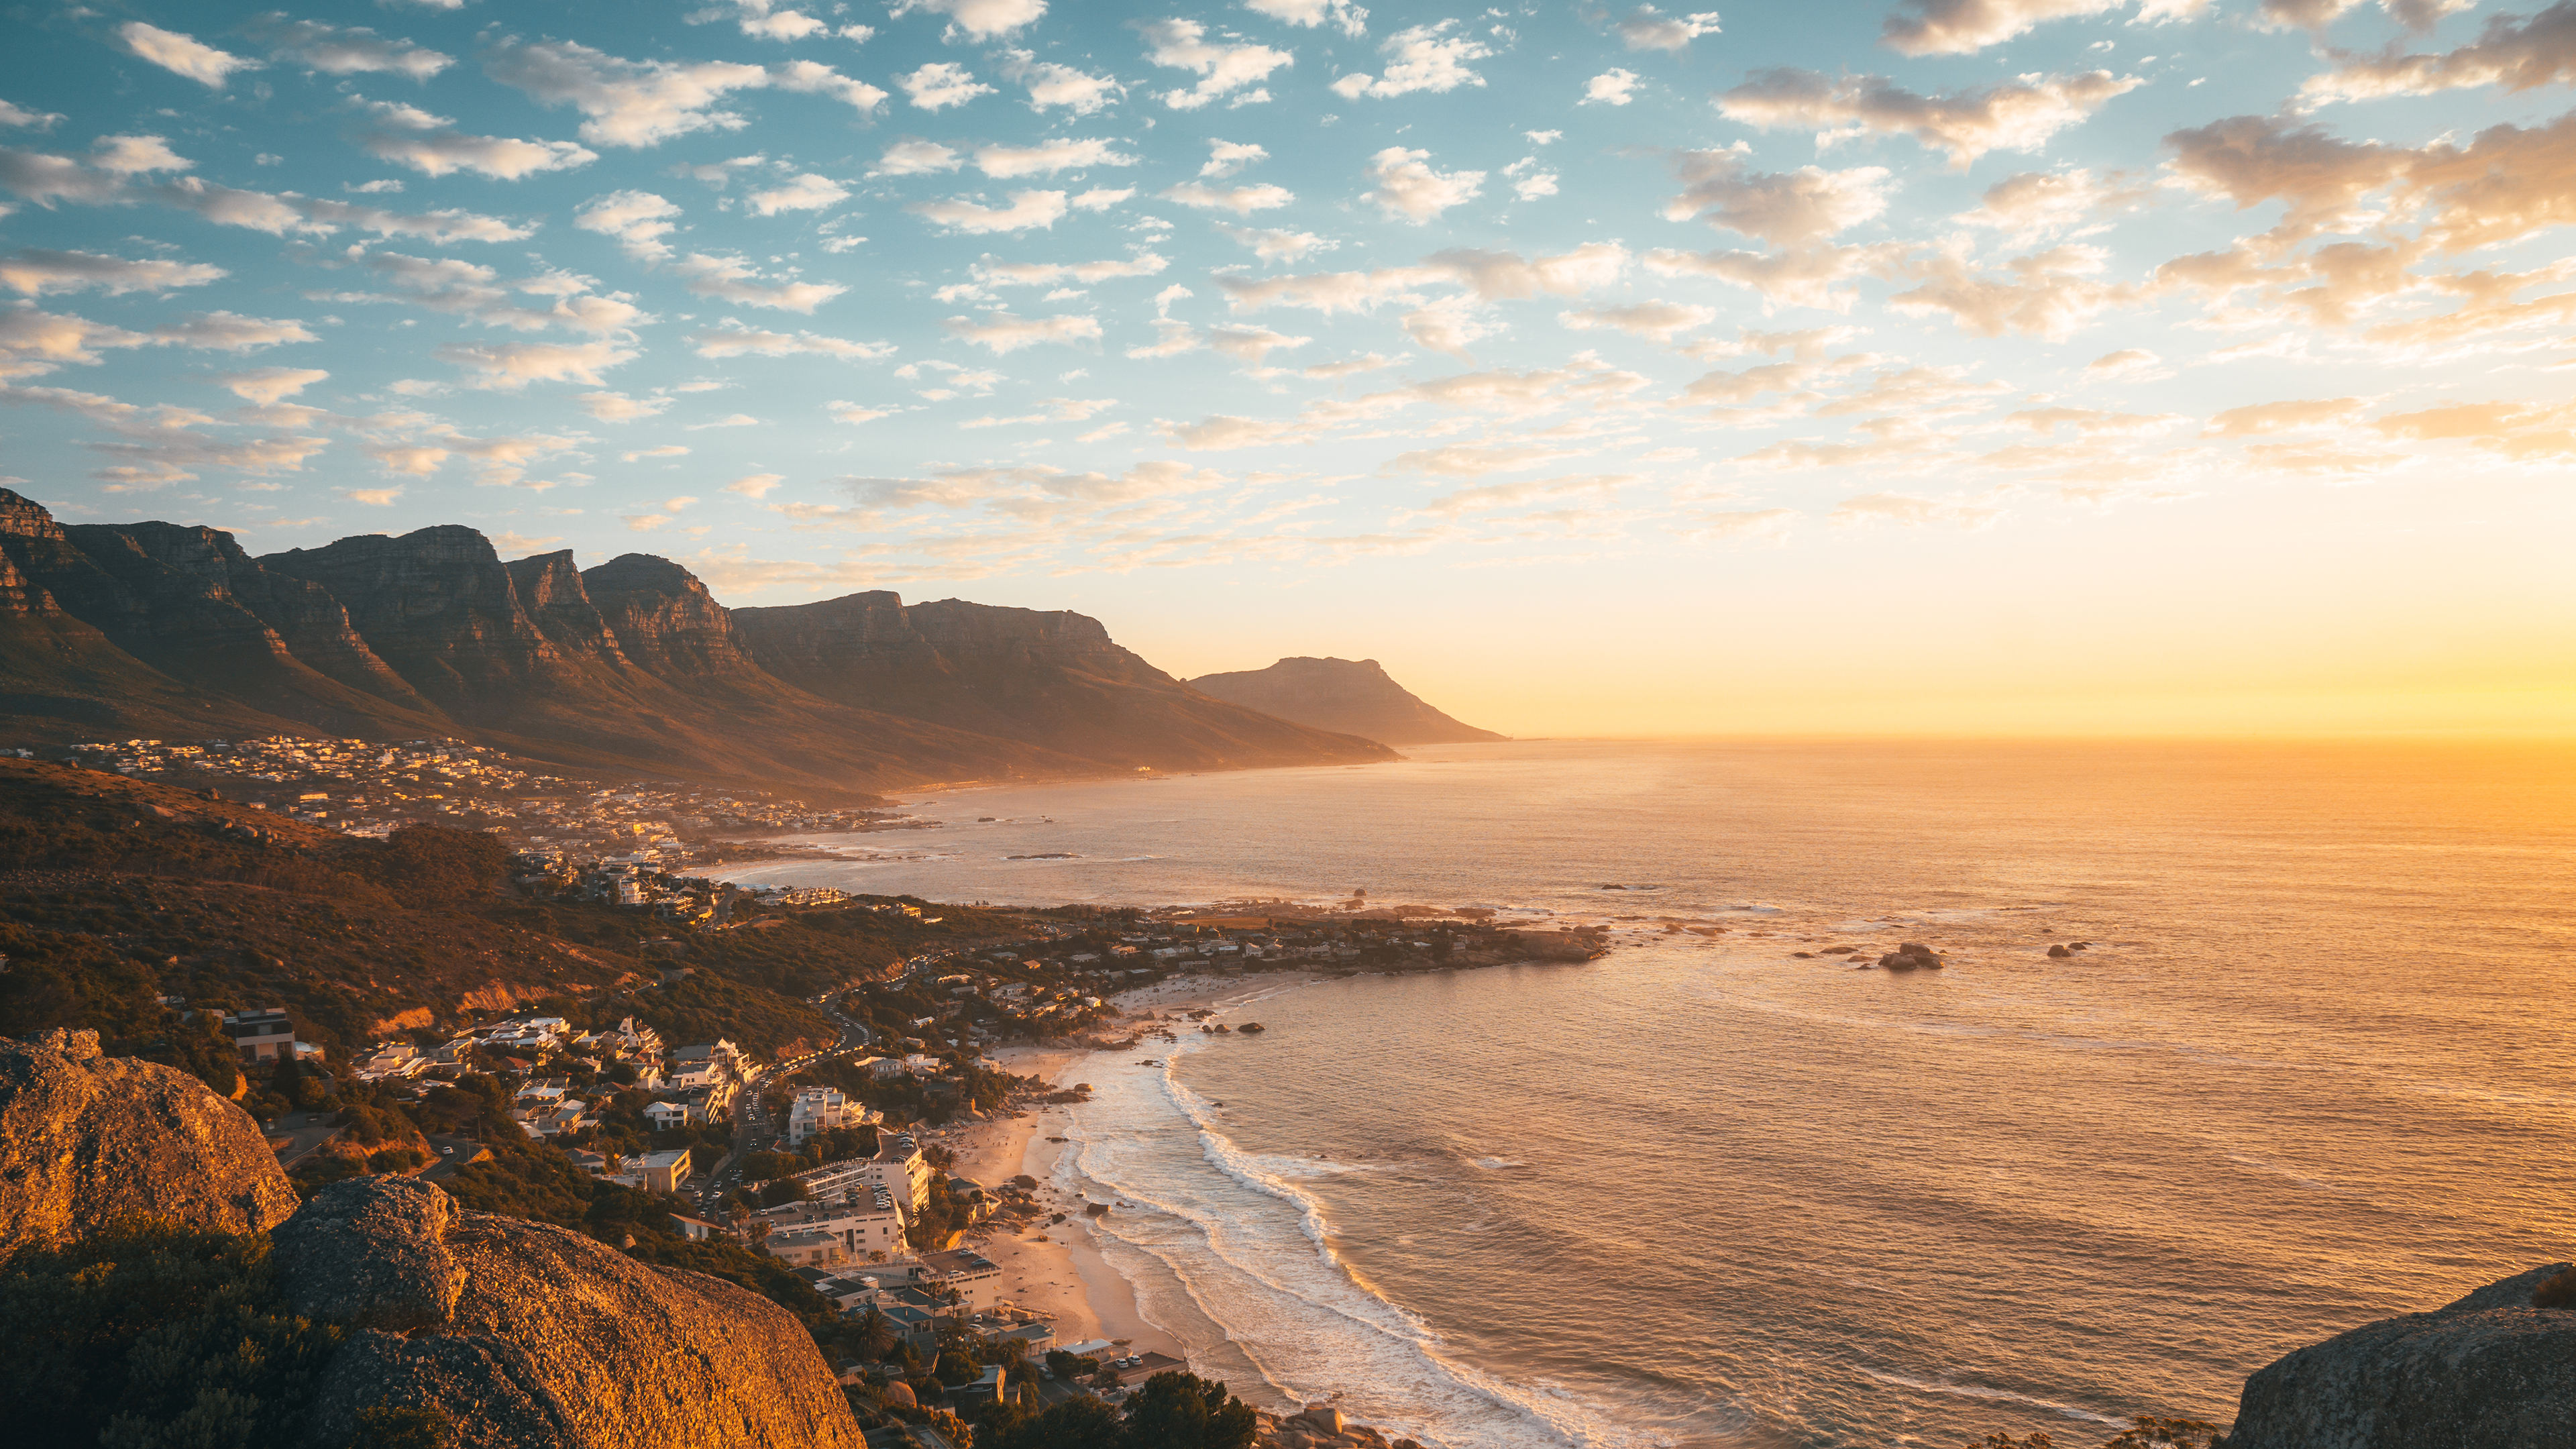 General 3840x2160 nature landscape mountains clouds sky town coast waves water far view sea South Africa Cape Town